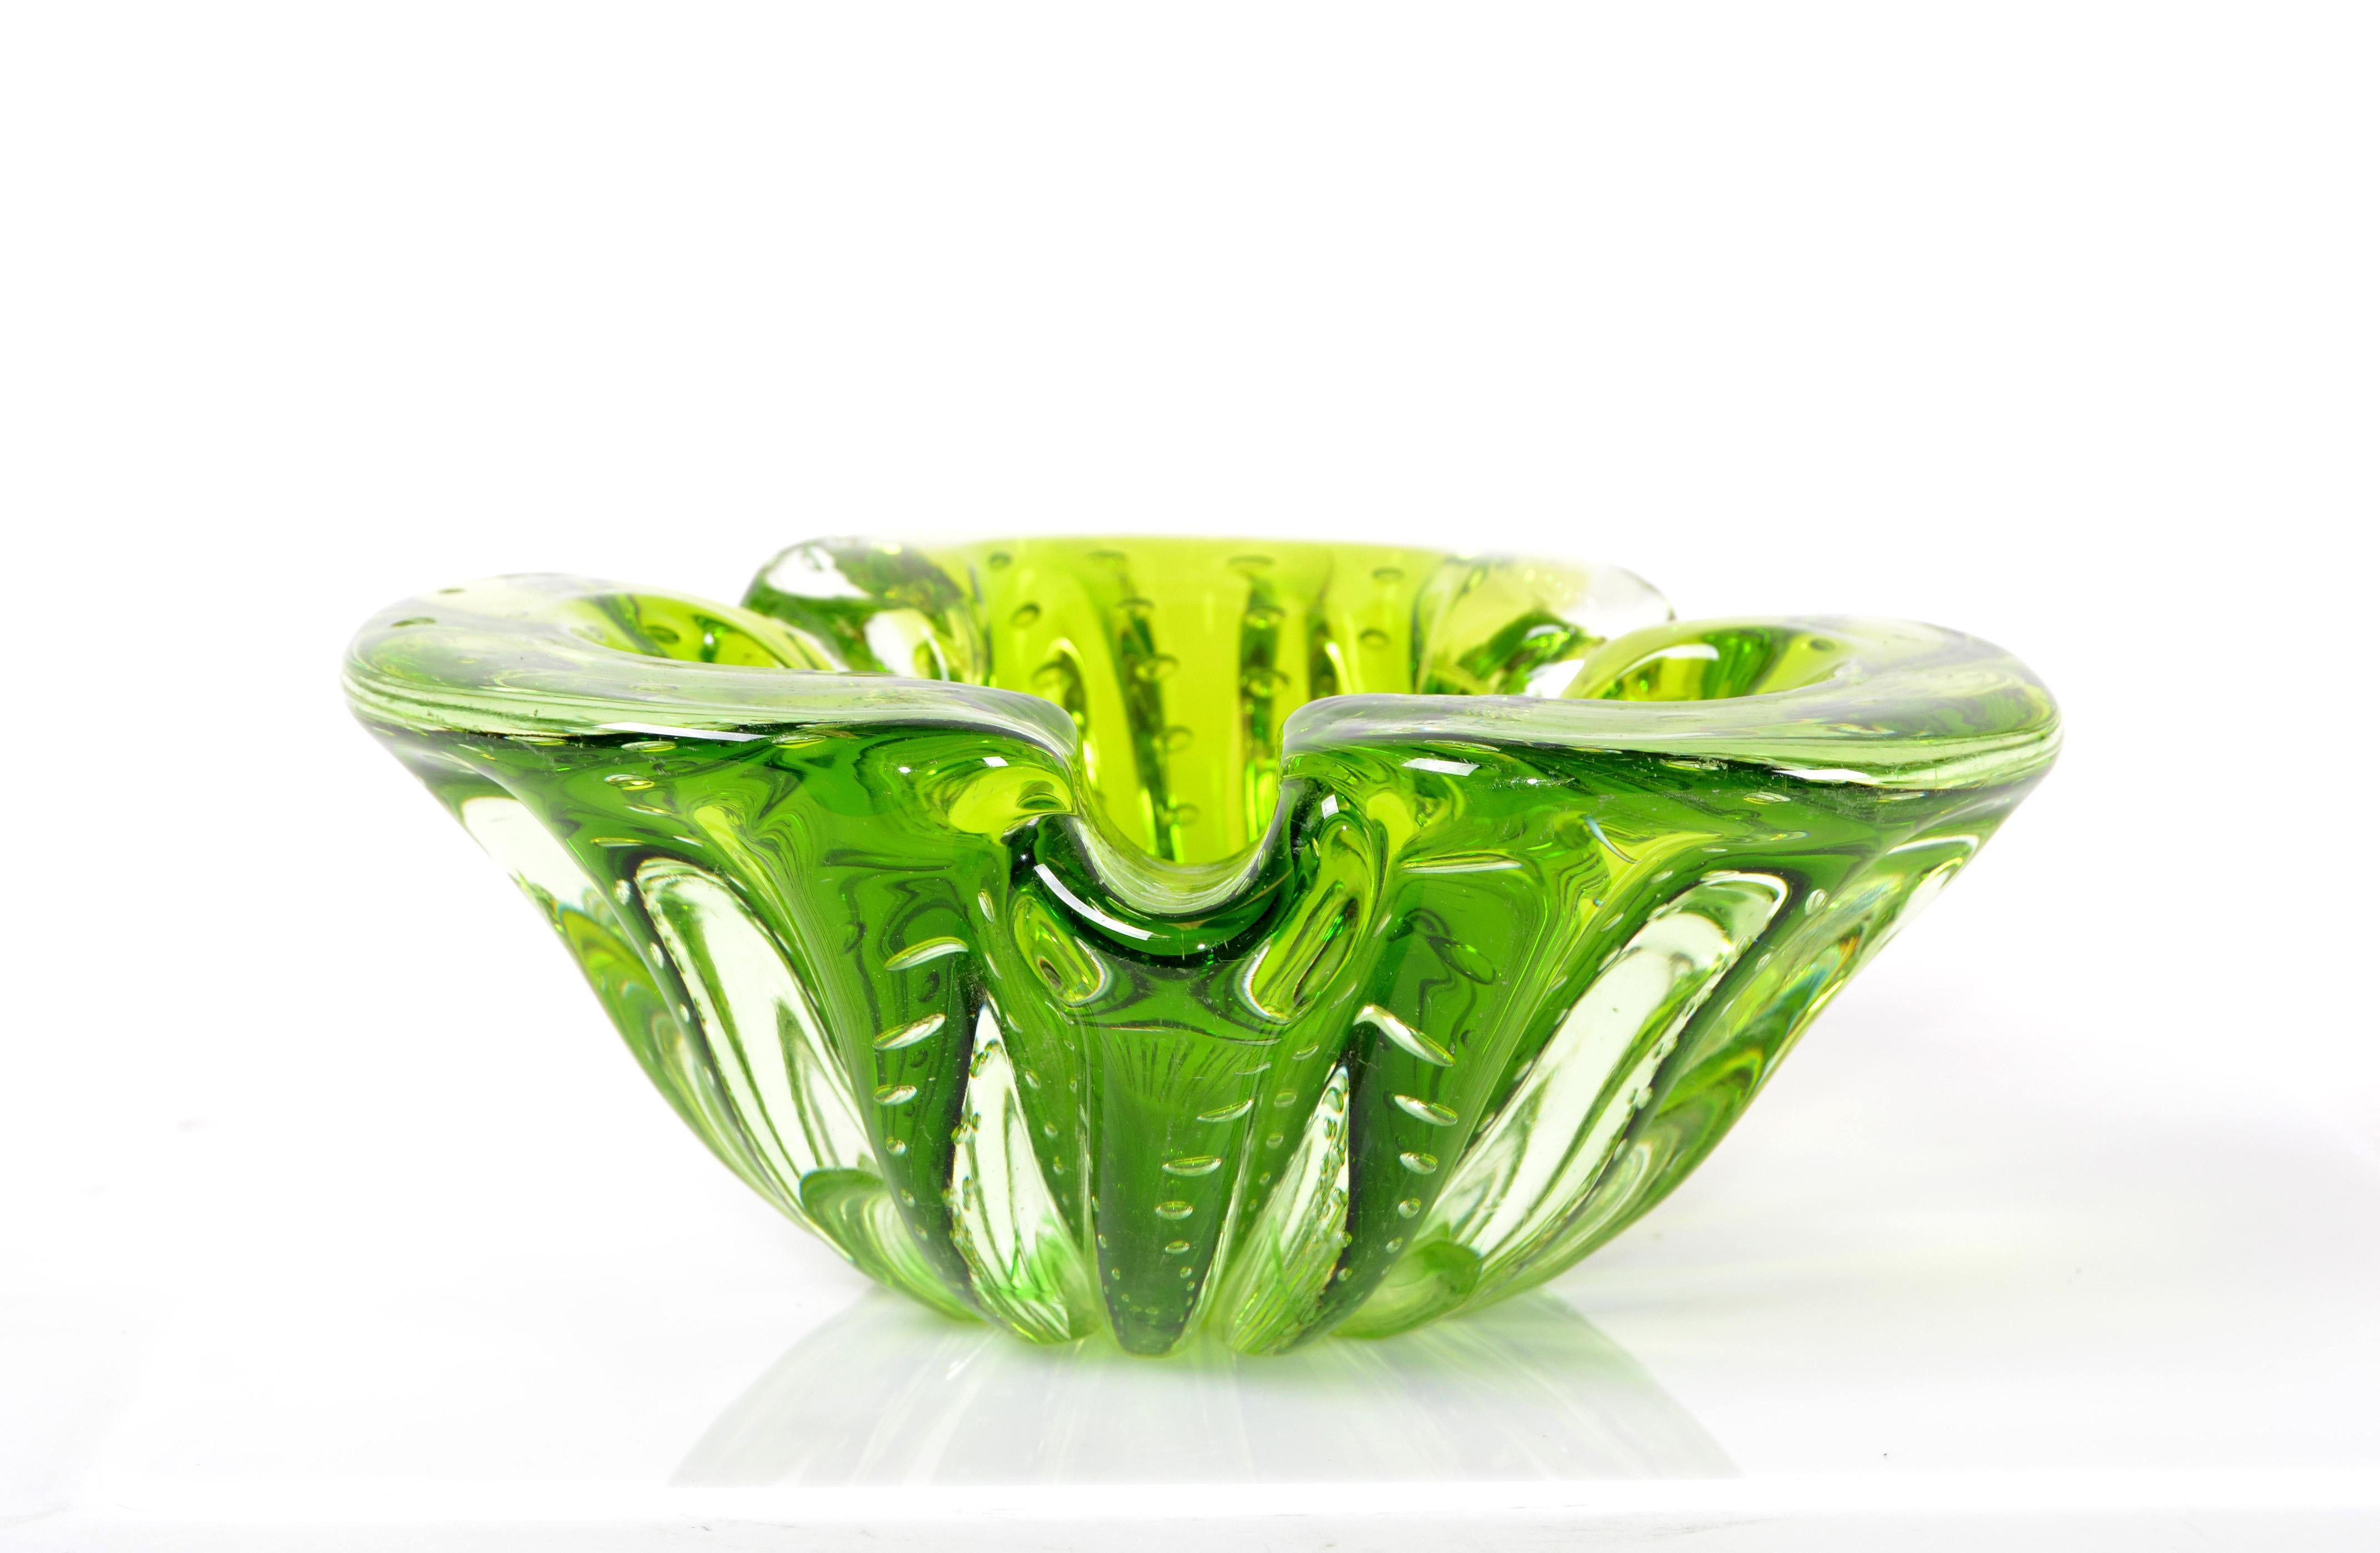 Italian Mid-Century Modern neon green blown art glass bowl, catchall or ashtray with controlled bubble.
Made in the late 20th century.
Simply beautiful.